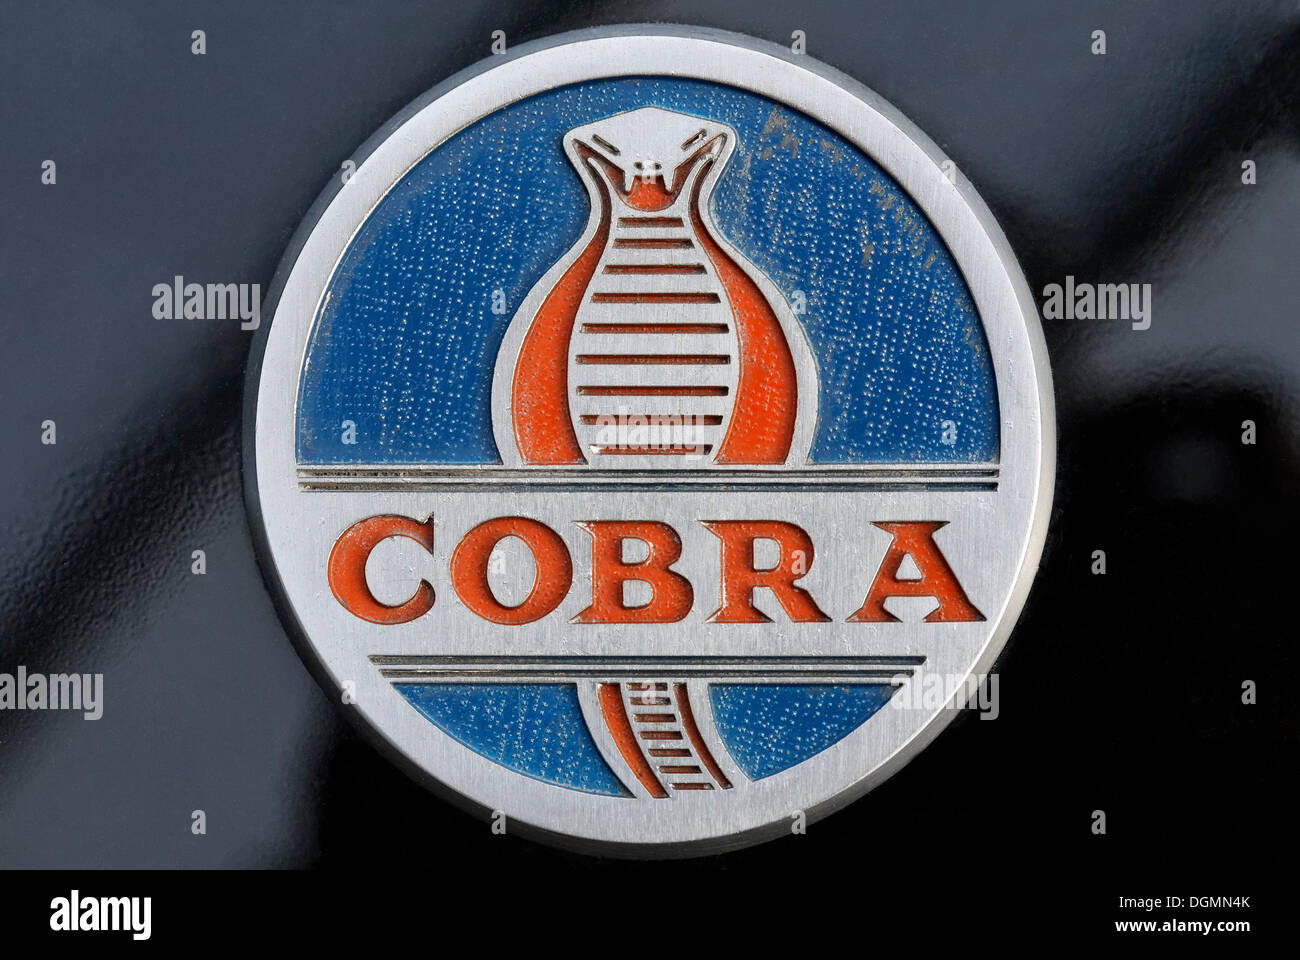 AC Cobra logo, wordmark with the image of a cobra, British vintage car from the '60s, Stock Photo